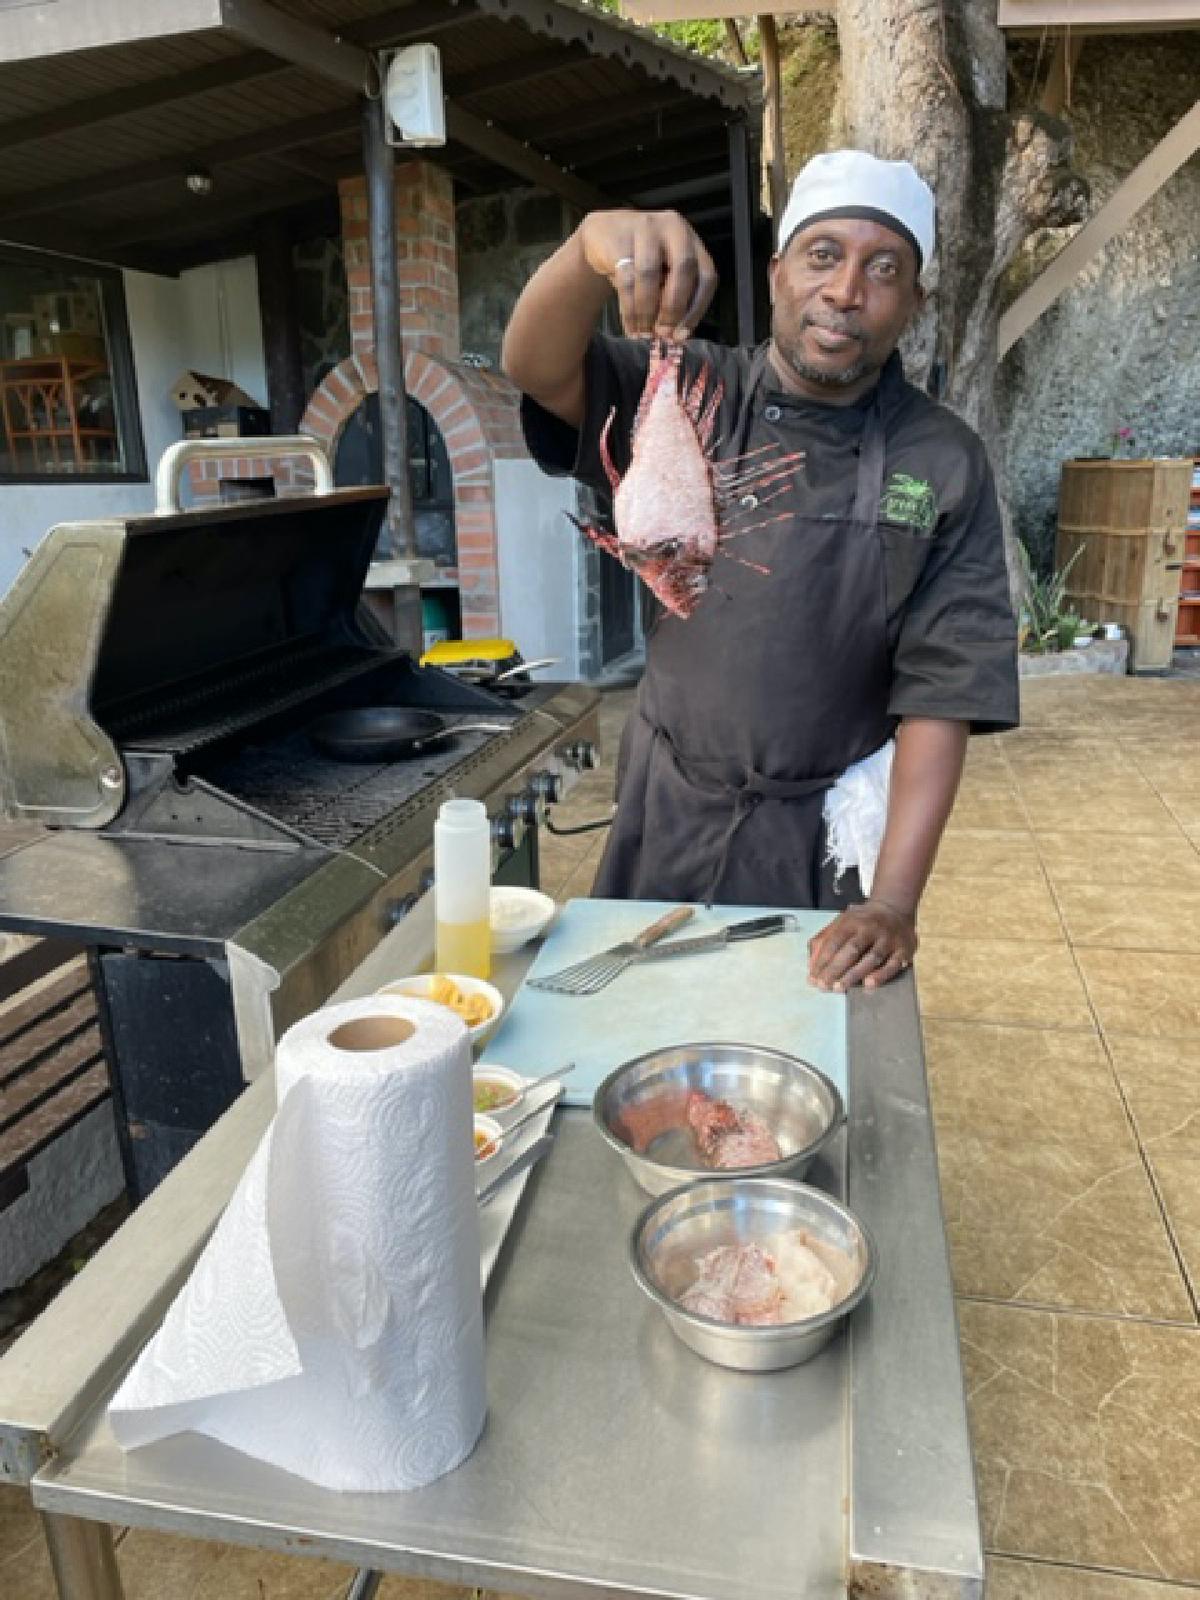 The Green Fig’s Chef Wesley teaches a safe and tasty way to dispose of lionfish, an invasive species in the Caribbean. (Photo courtesy of Lesley Frederikson)